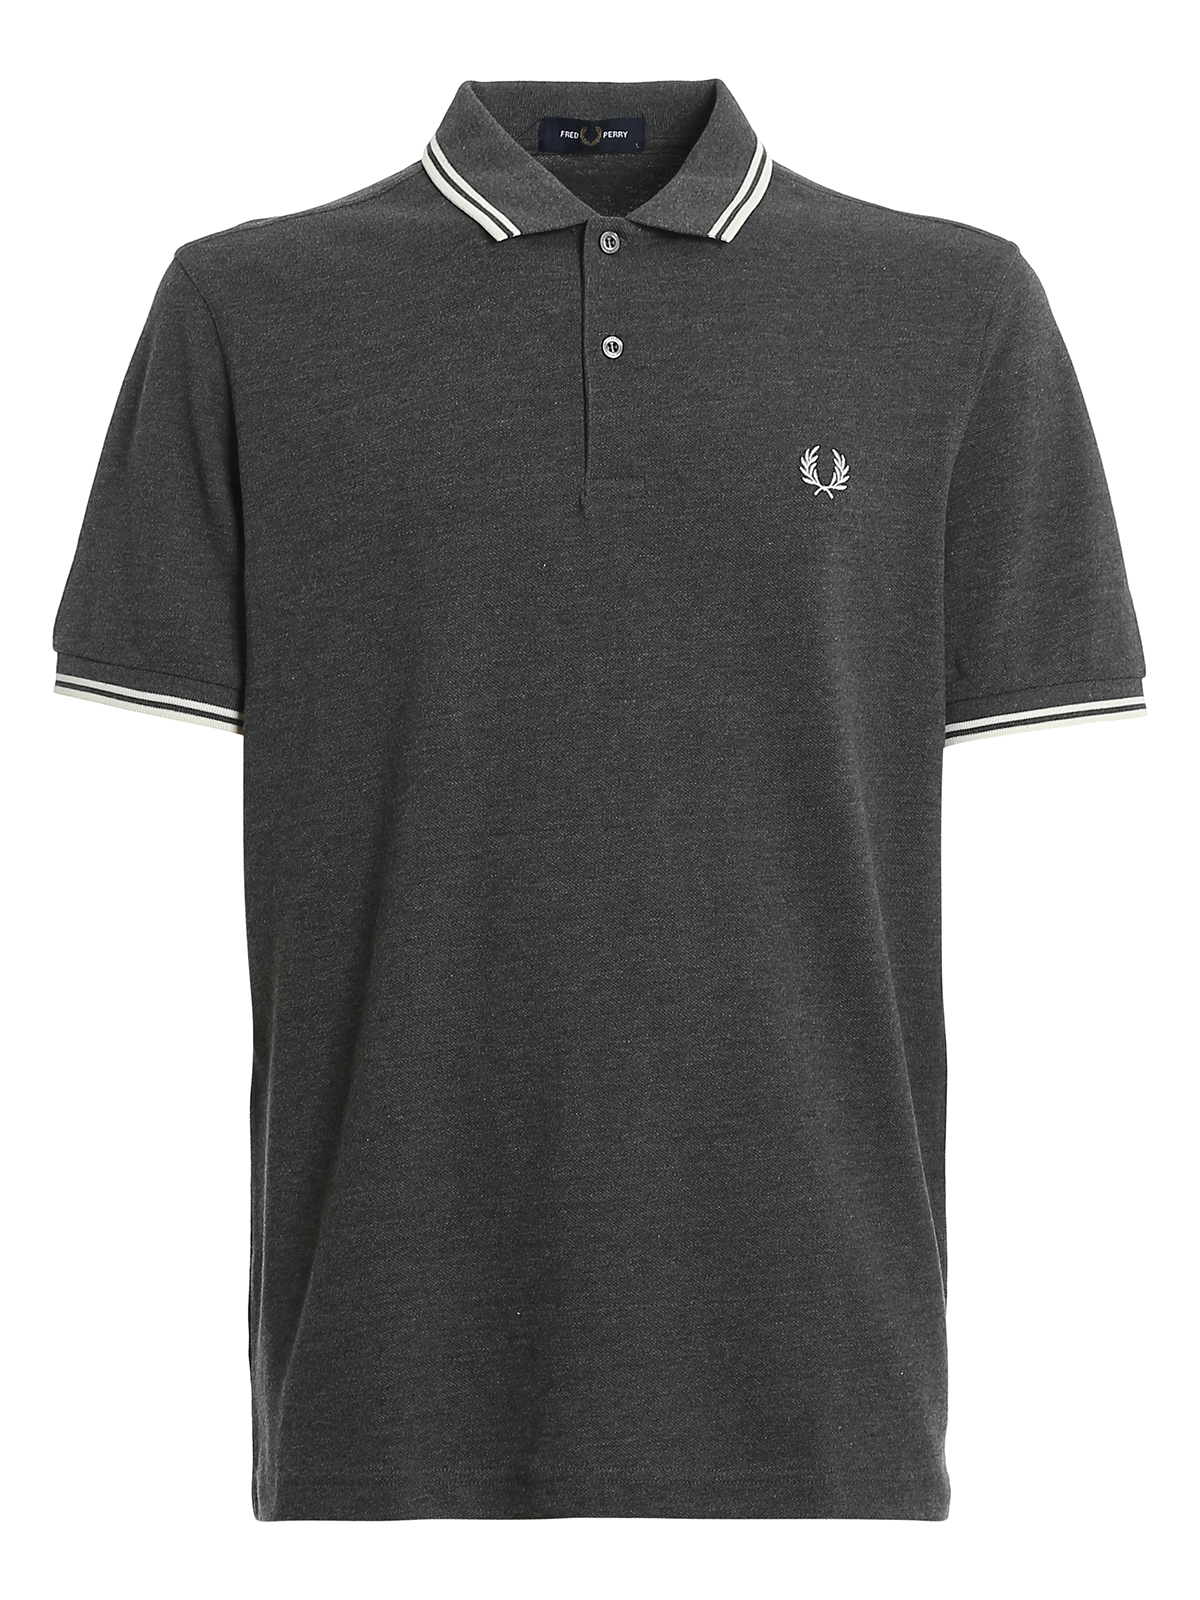 FRED PERRY POLO - GRIS OSCURO